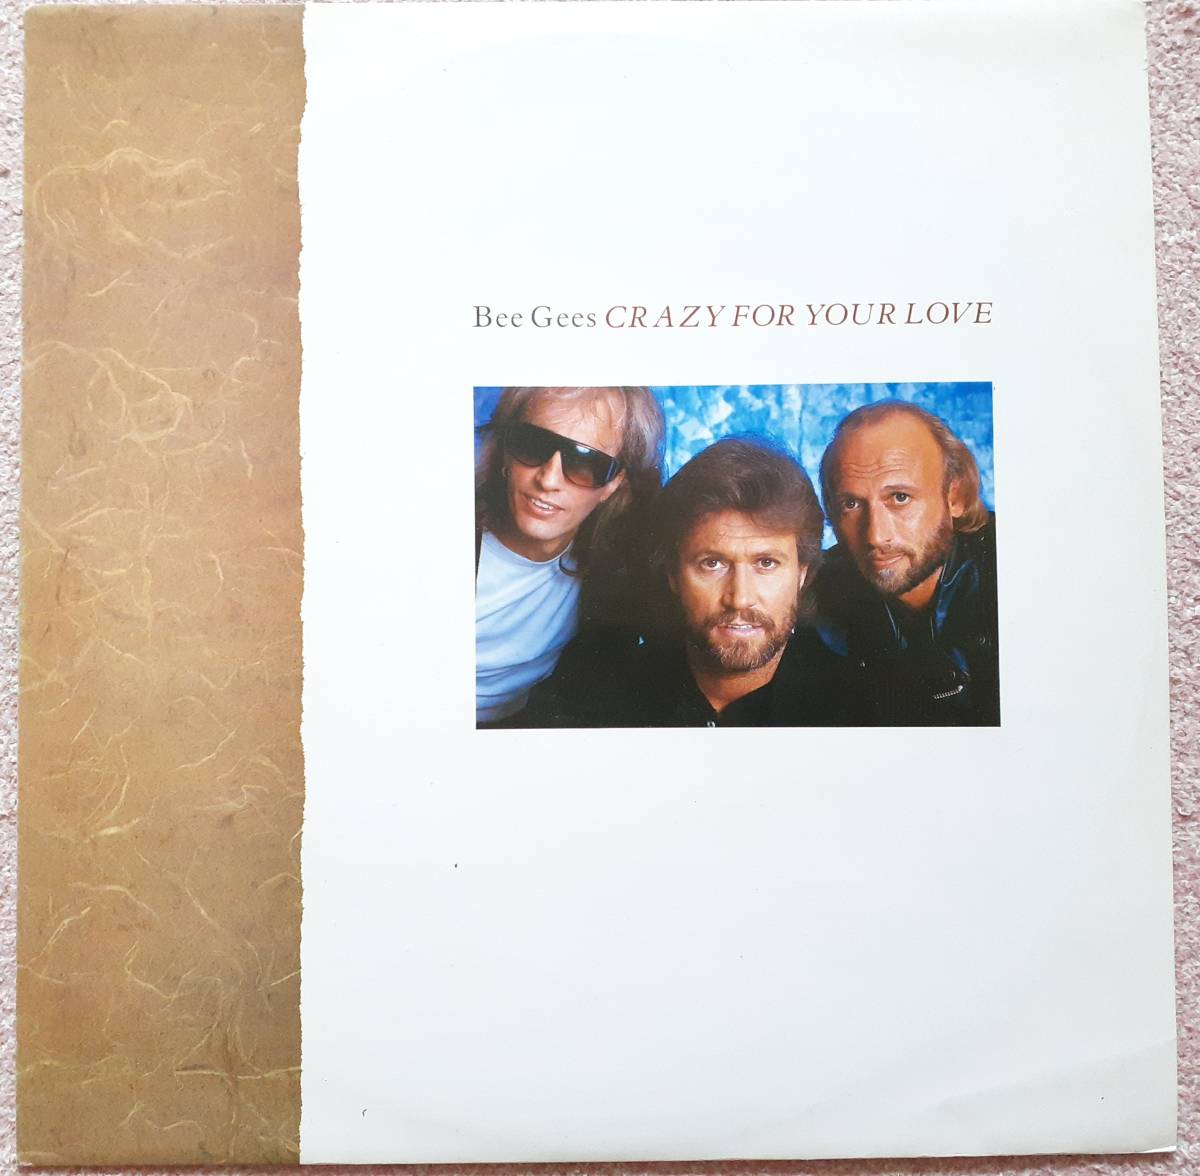 BEE GEES　ビー・ジーズ　Crazy For Your Love / You Win Again (5.14 Remix)　 UK盤 12” シングル レコード _画像3